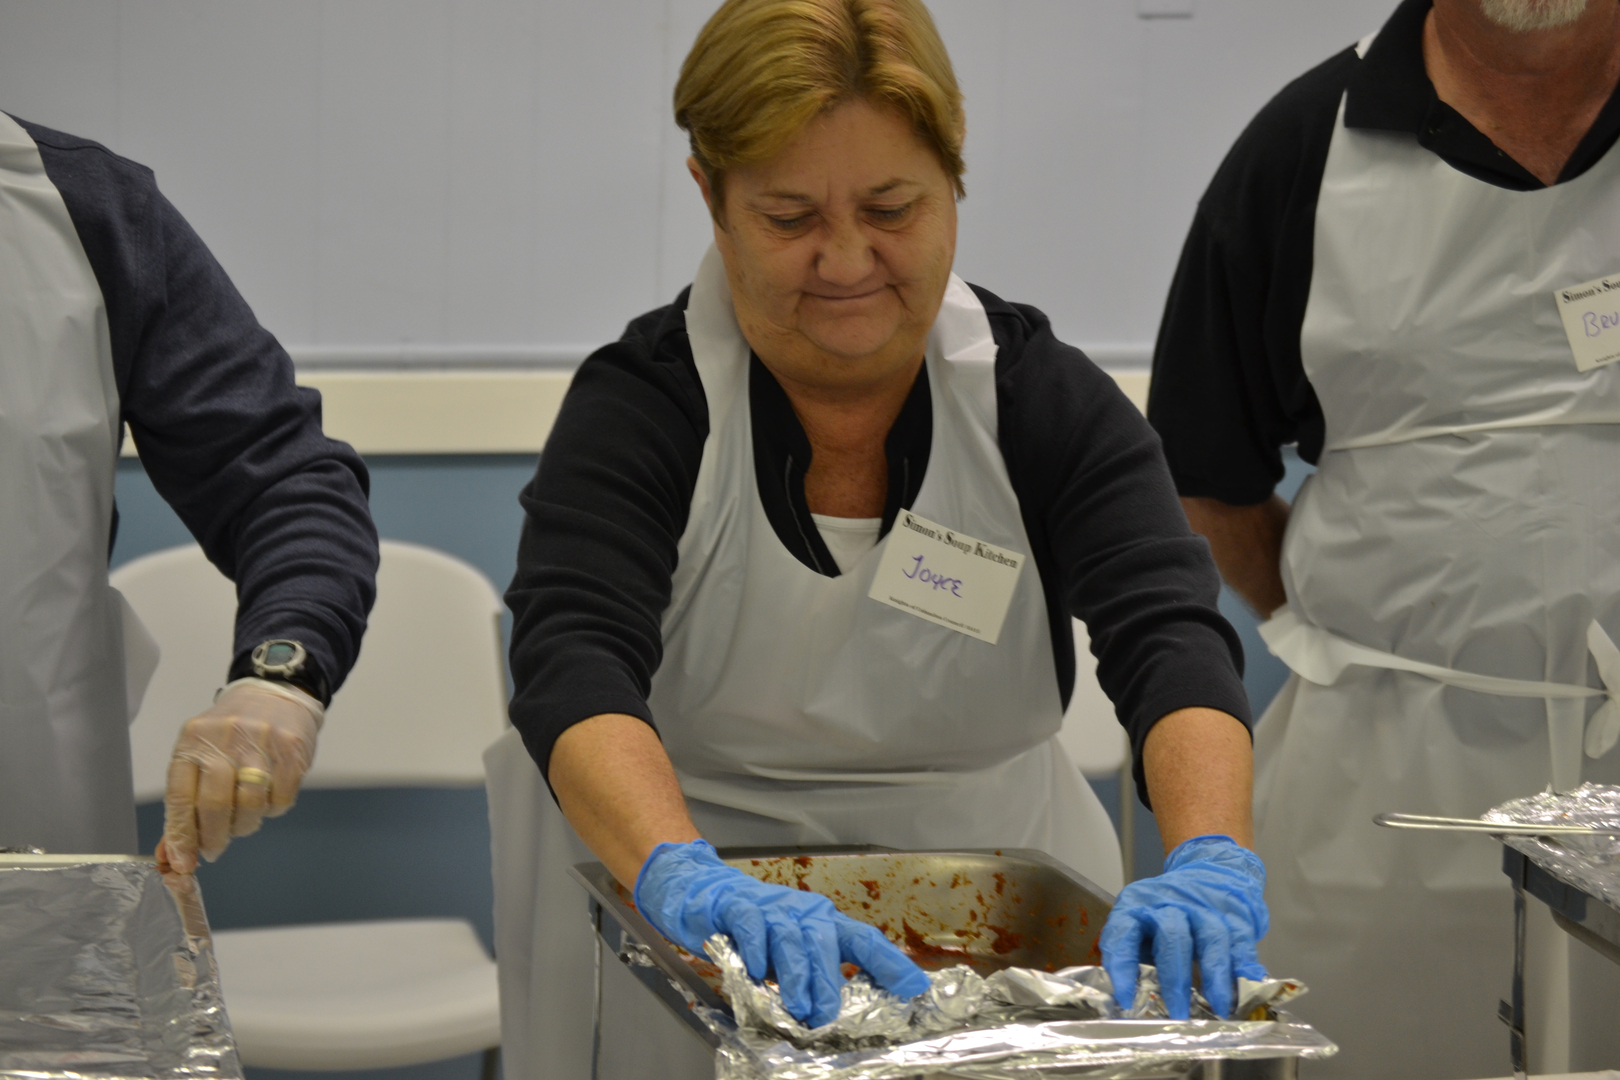 Volunteers serve meals at Simon's Soup Kitchen in Seaside Heights. (Photo: Simon's Soup Kitchen)